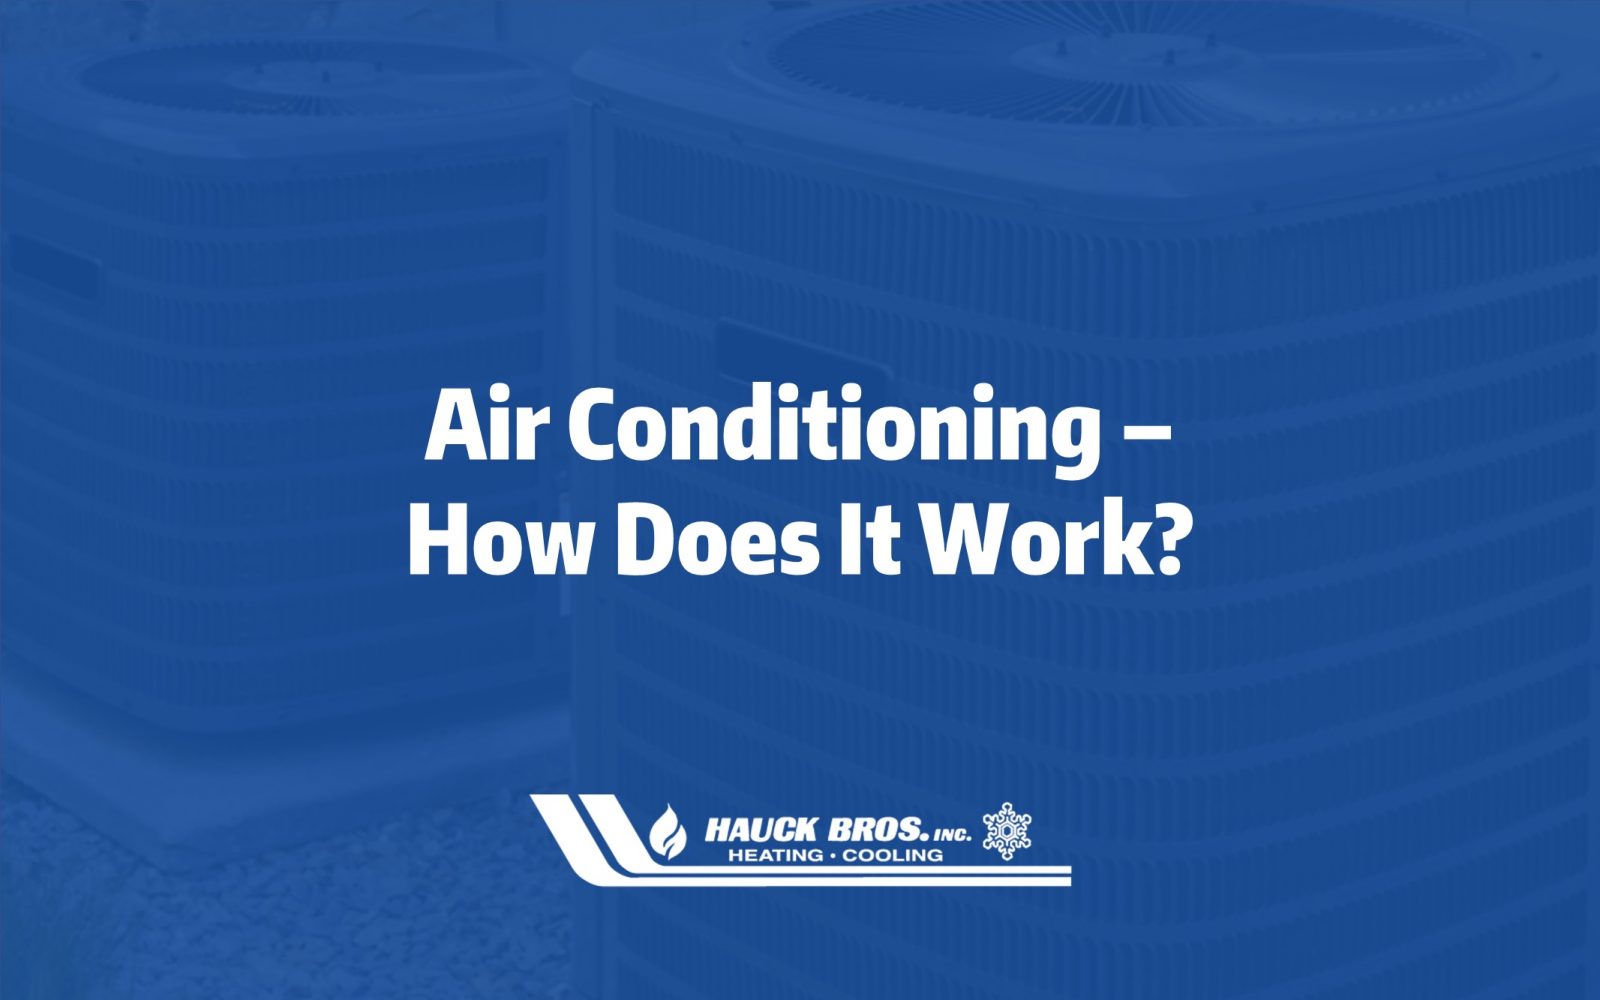 Air Conditioning - How Does it Work?